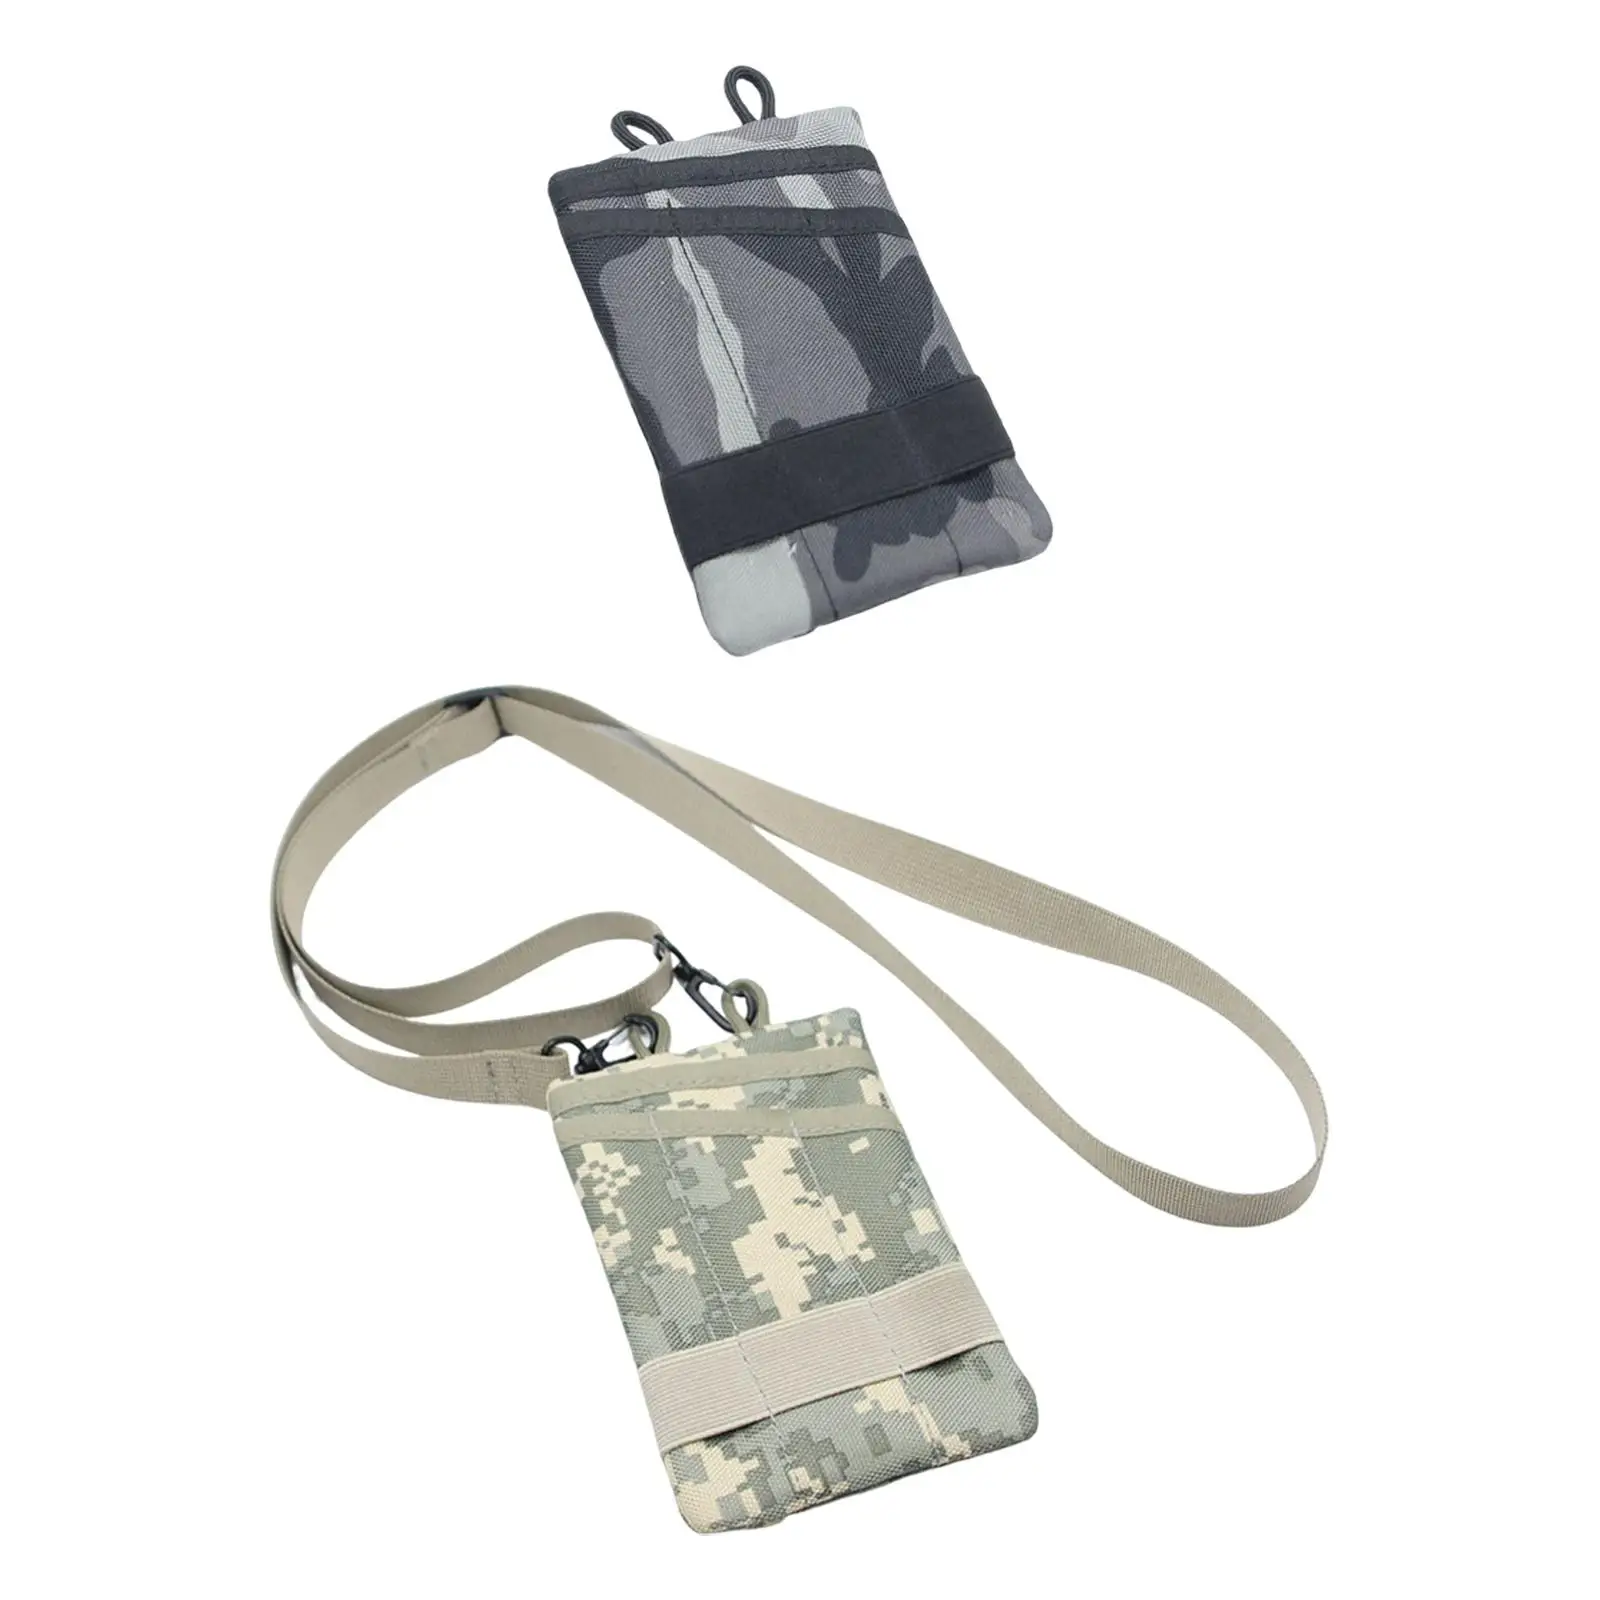 Pocket Organizer Pouch Pocket Pouch Organizer Camouflage Pocket Purse EDC Bag Organizer for Outdoor Activities Camping Travel